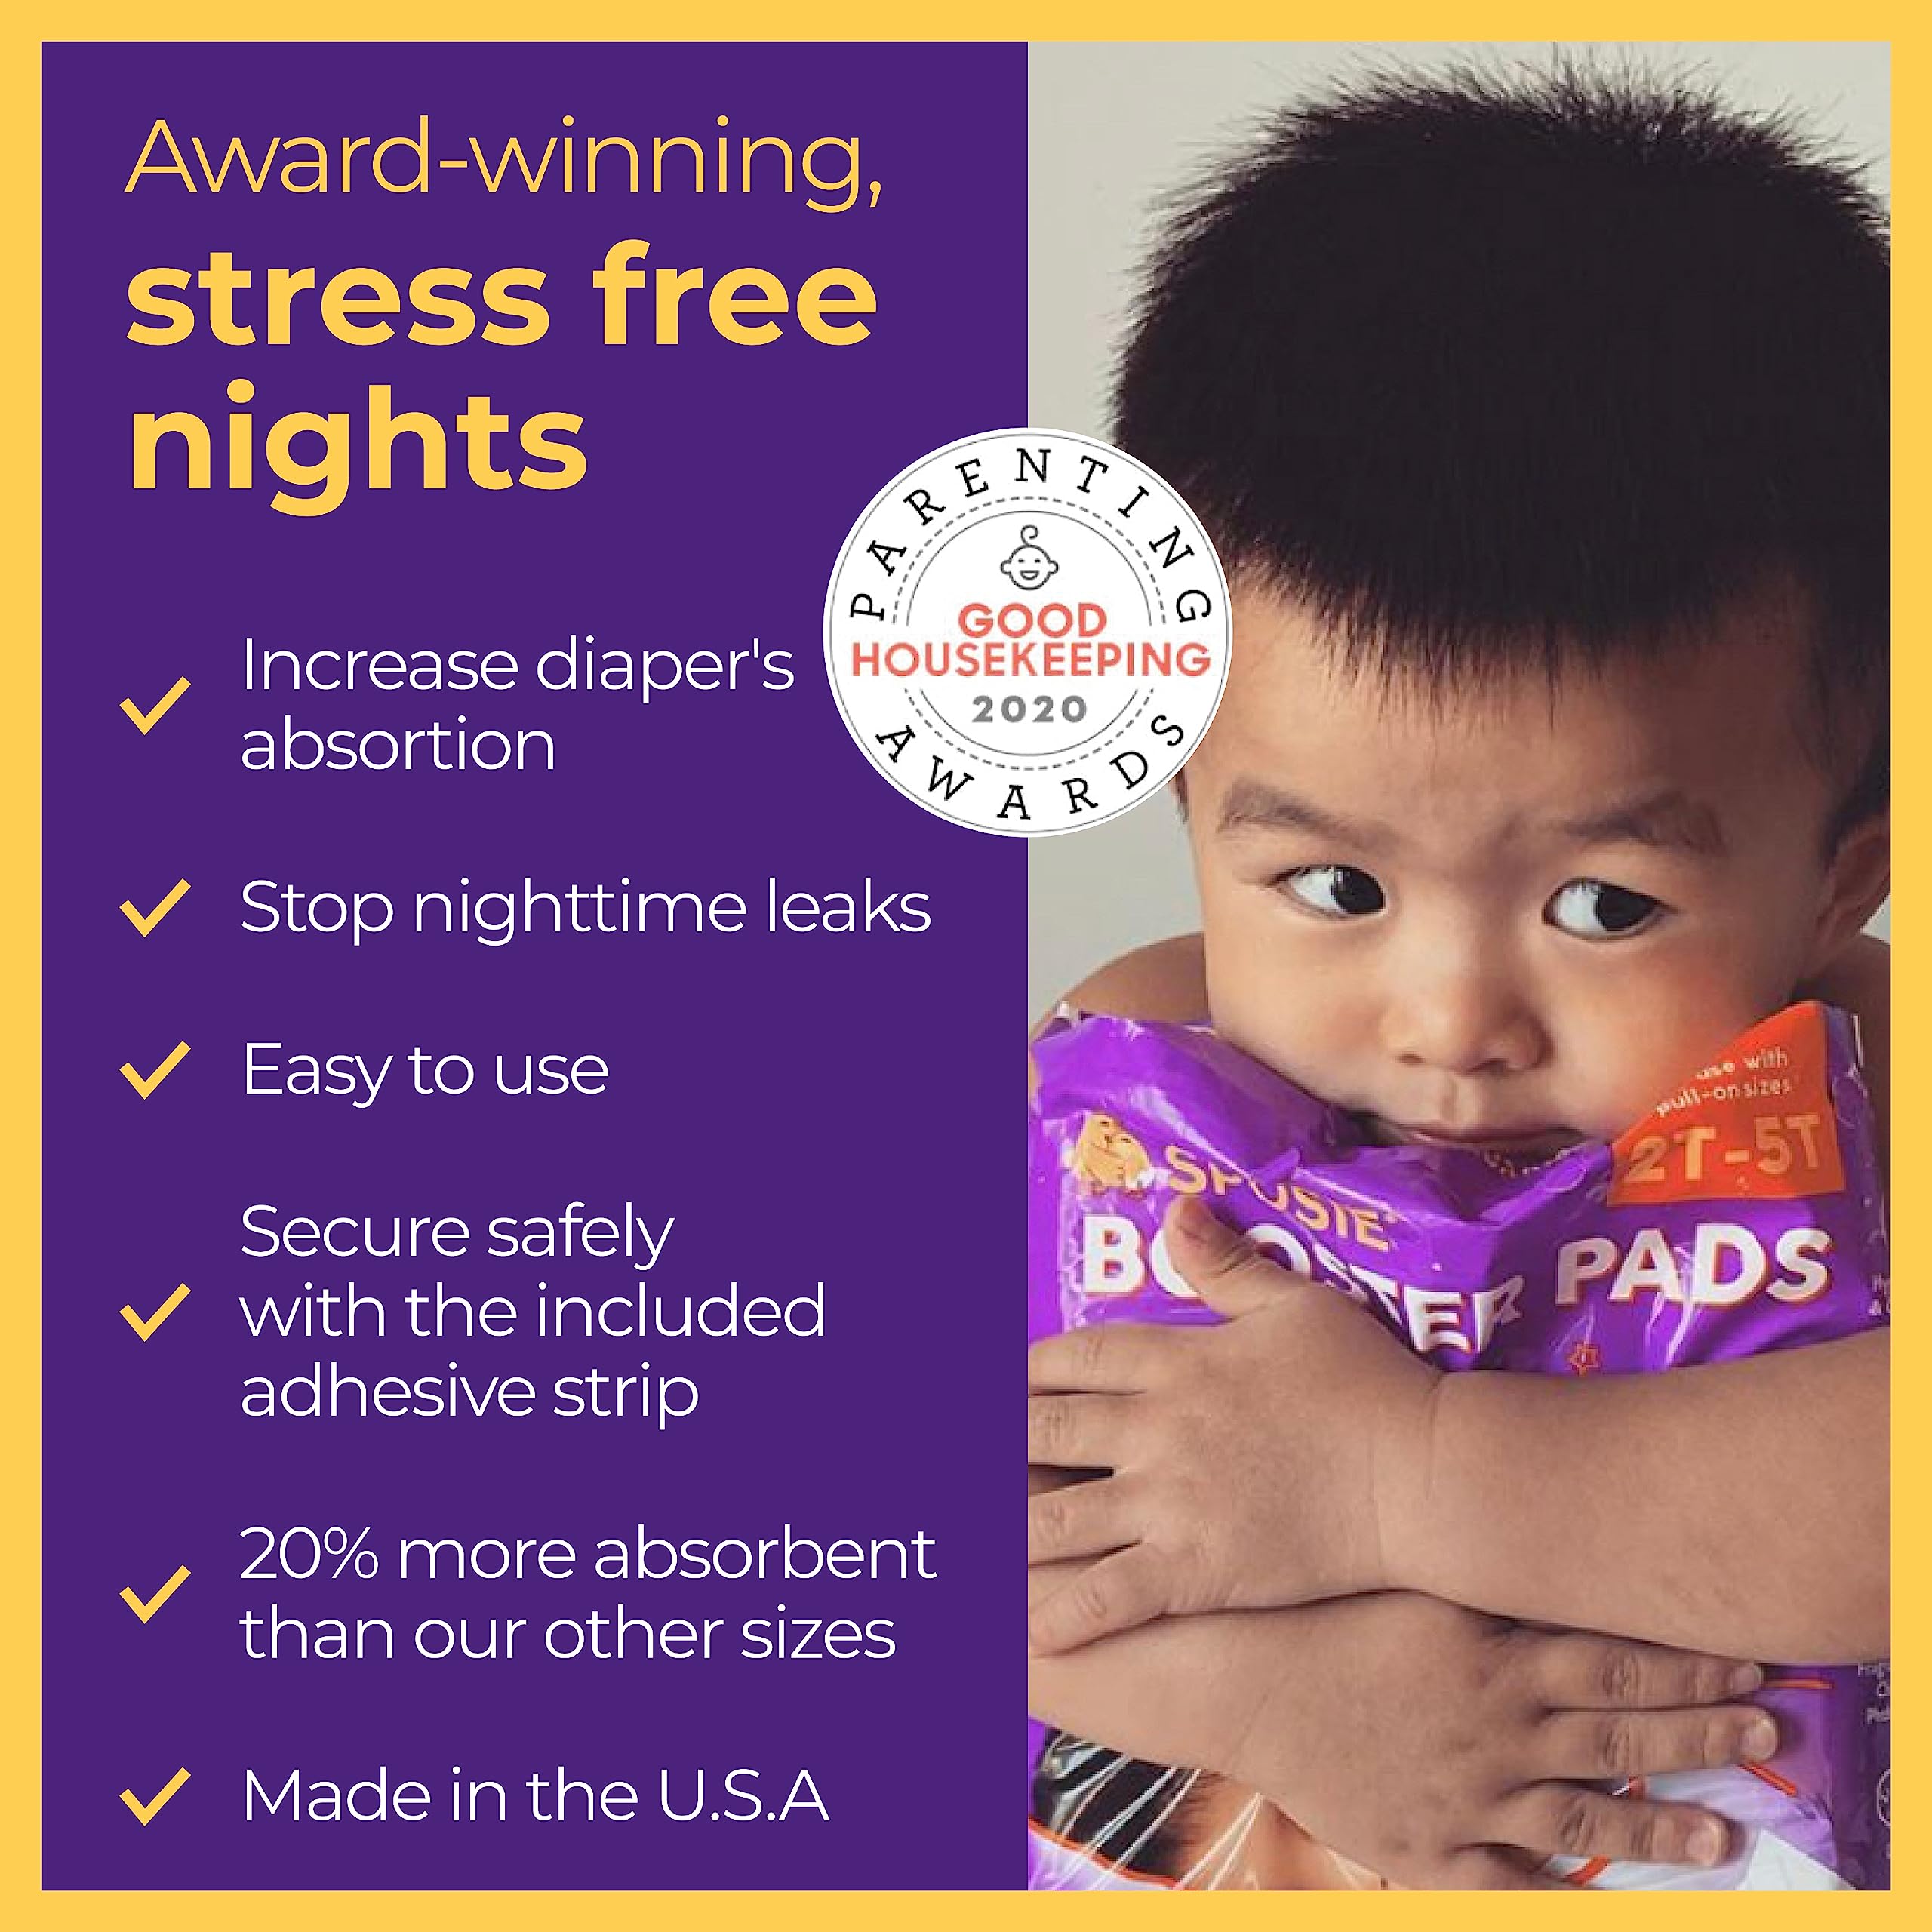 Sposie Diaper Booster Pads with Adhesive for Active Sleepers, Stop Overnight Diaper Leaks, Reduce Nighttime Diaper Changes, for Diaper Sizes 4, 5, 6, 2T-5T, 84 ct.